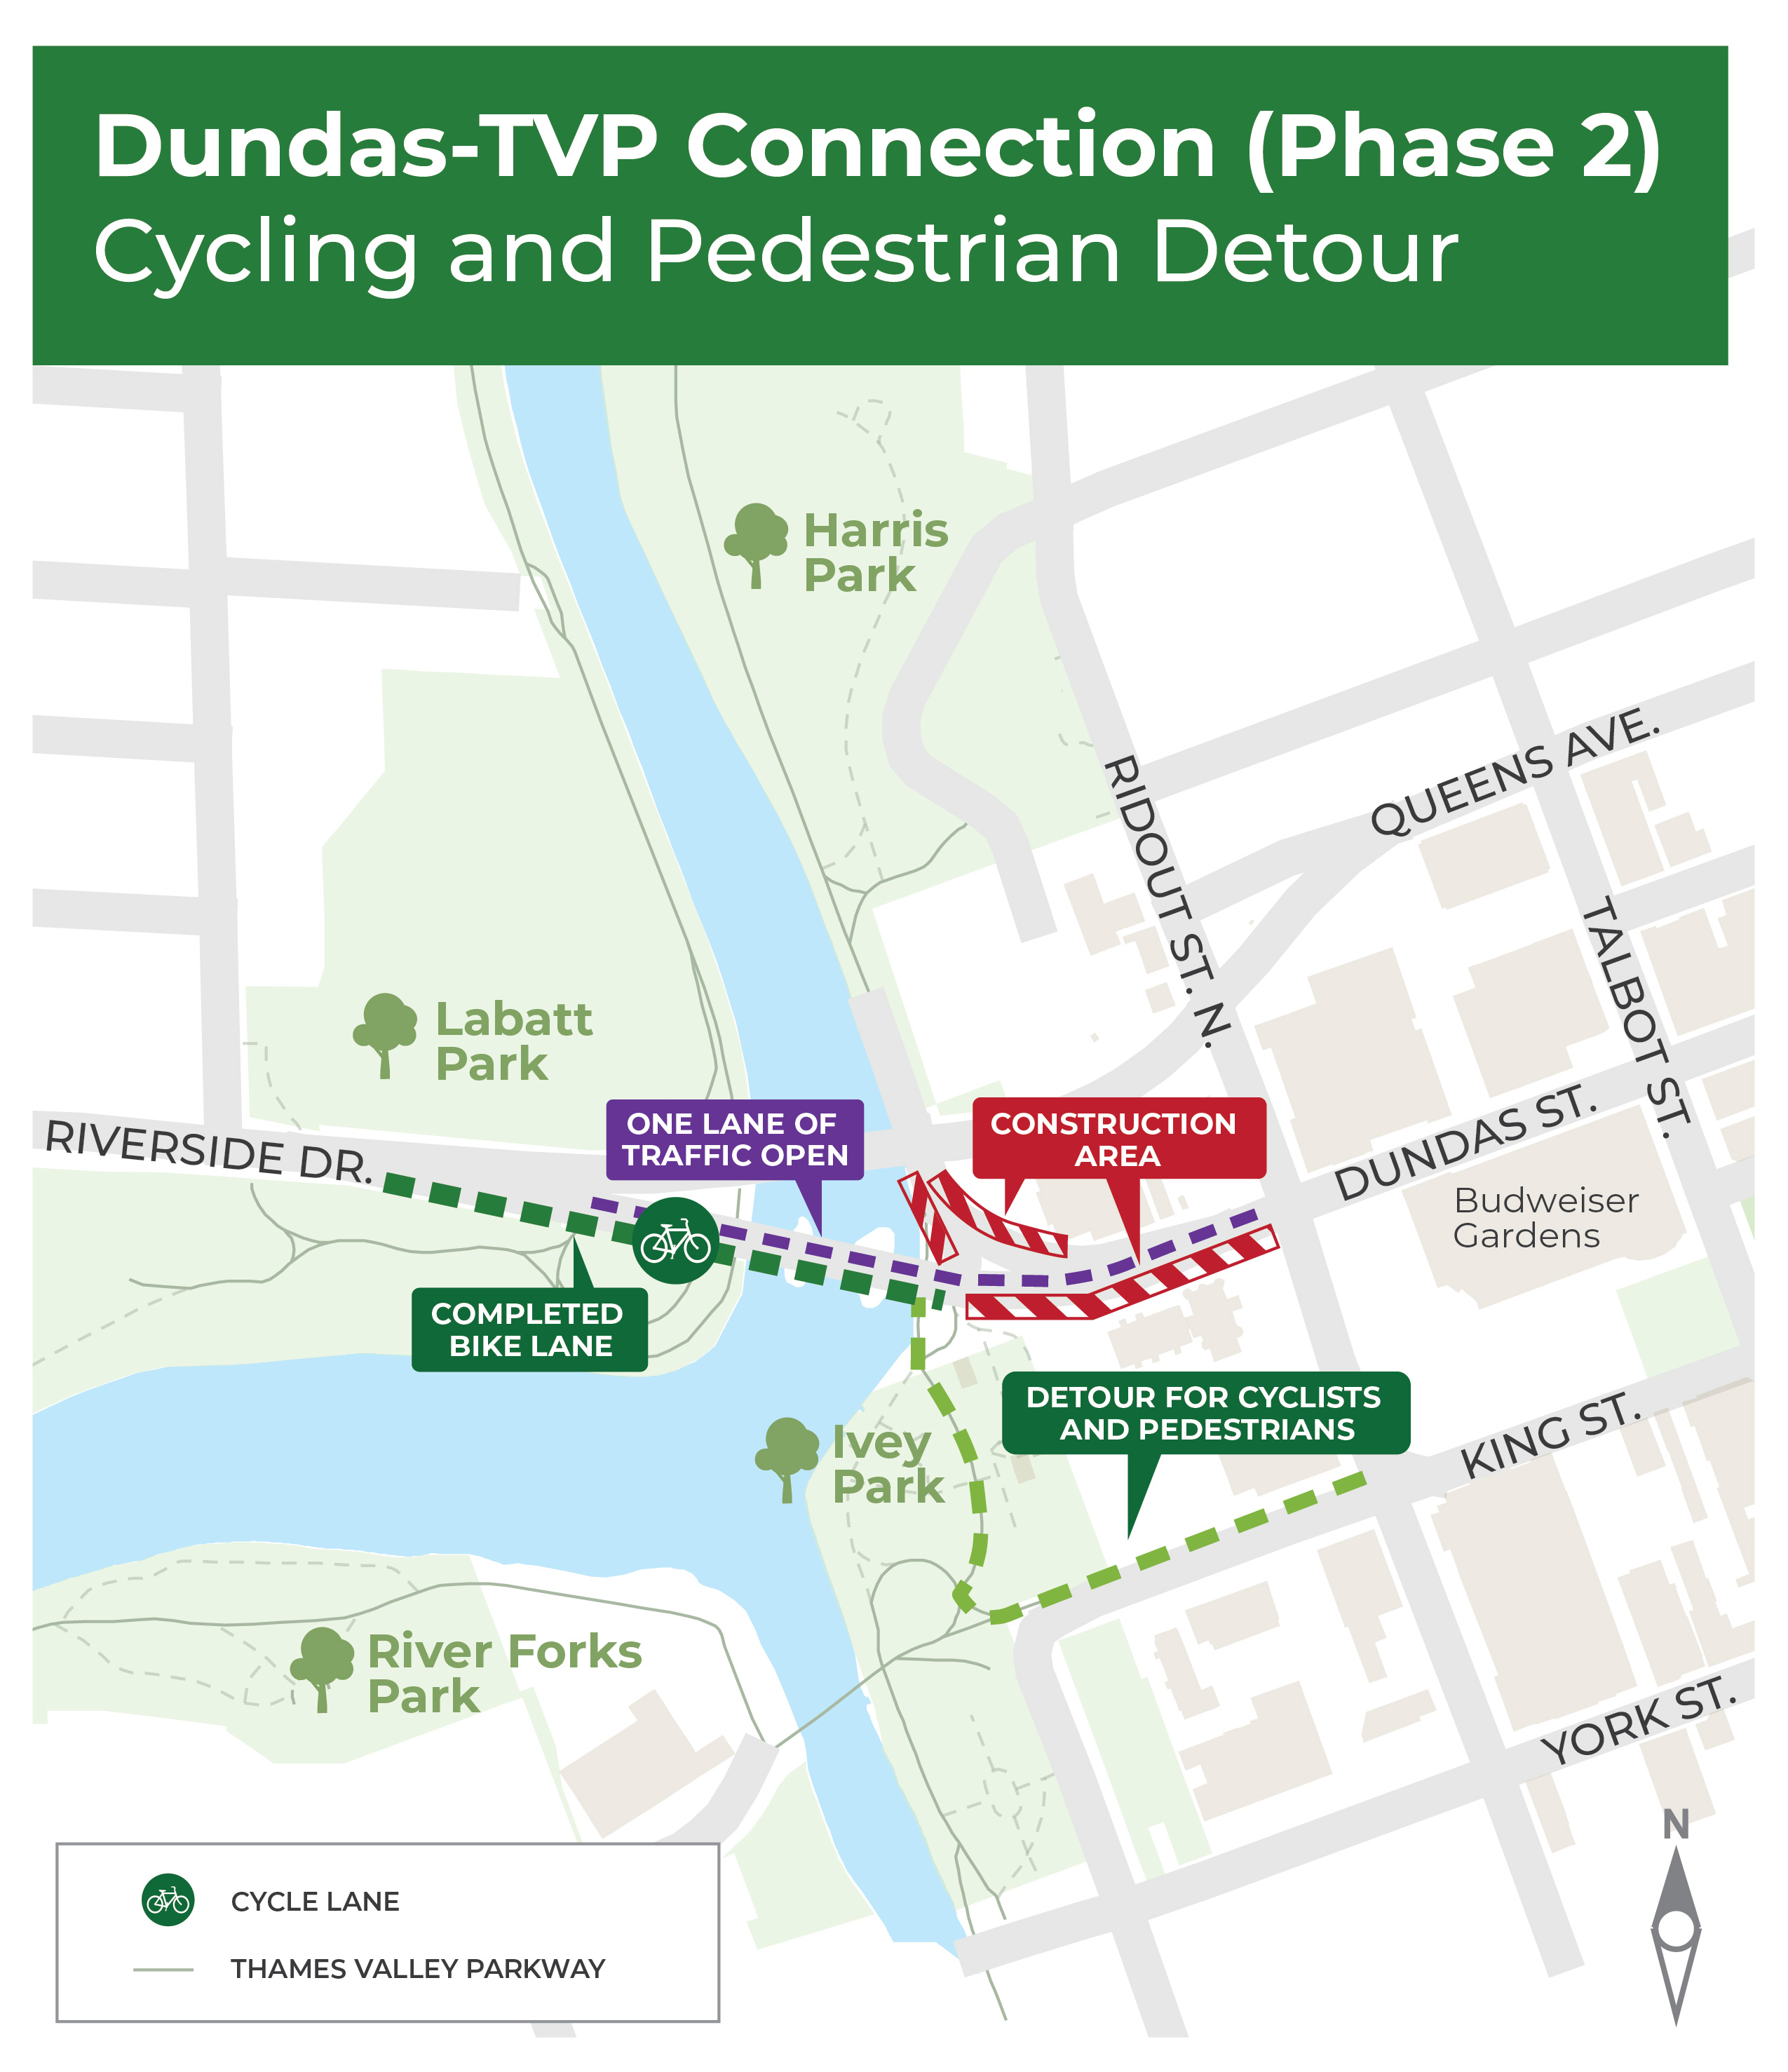 A map of the Dundas-TVP Construction detour. For more information, please contact Paul Yanchuk at pyanchuk@london.ca or by calling 519-661-2489 x 2563